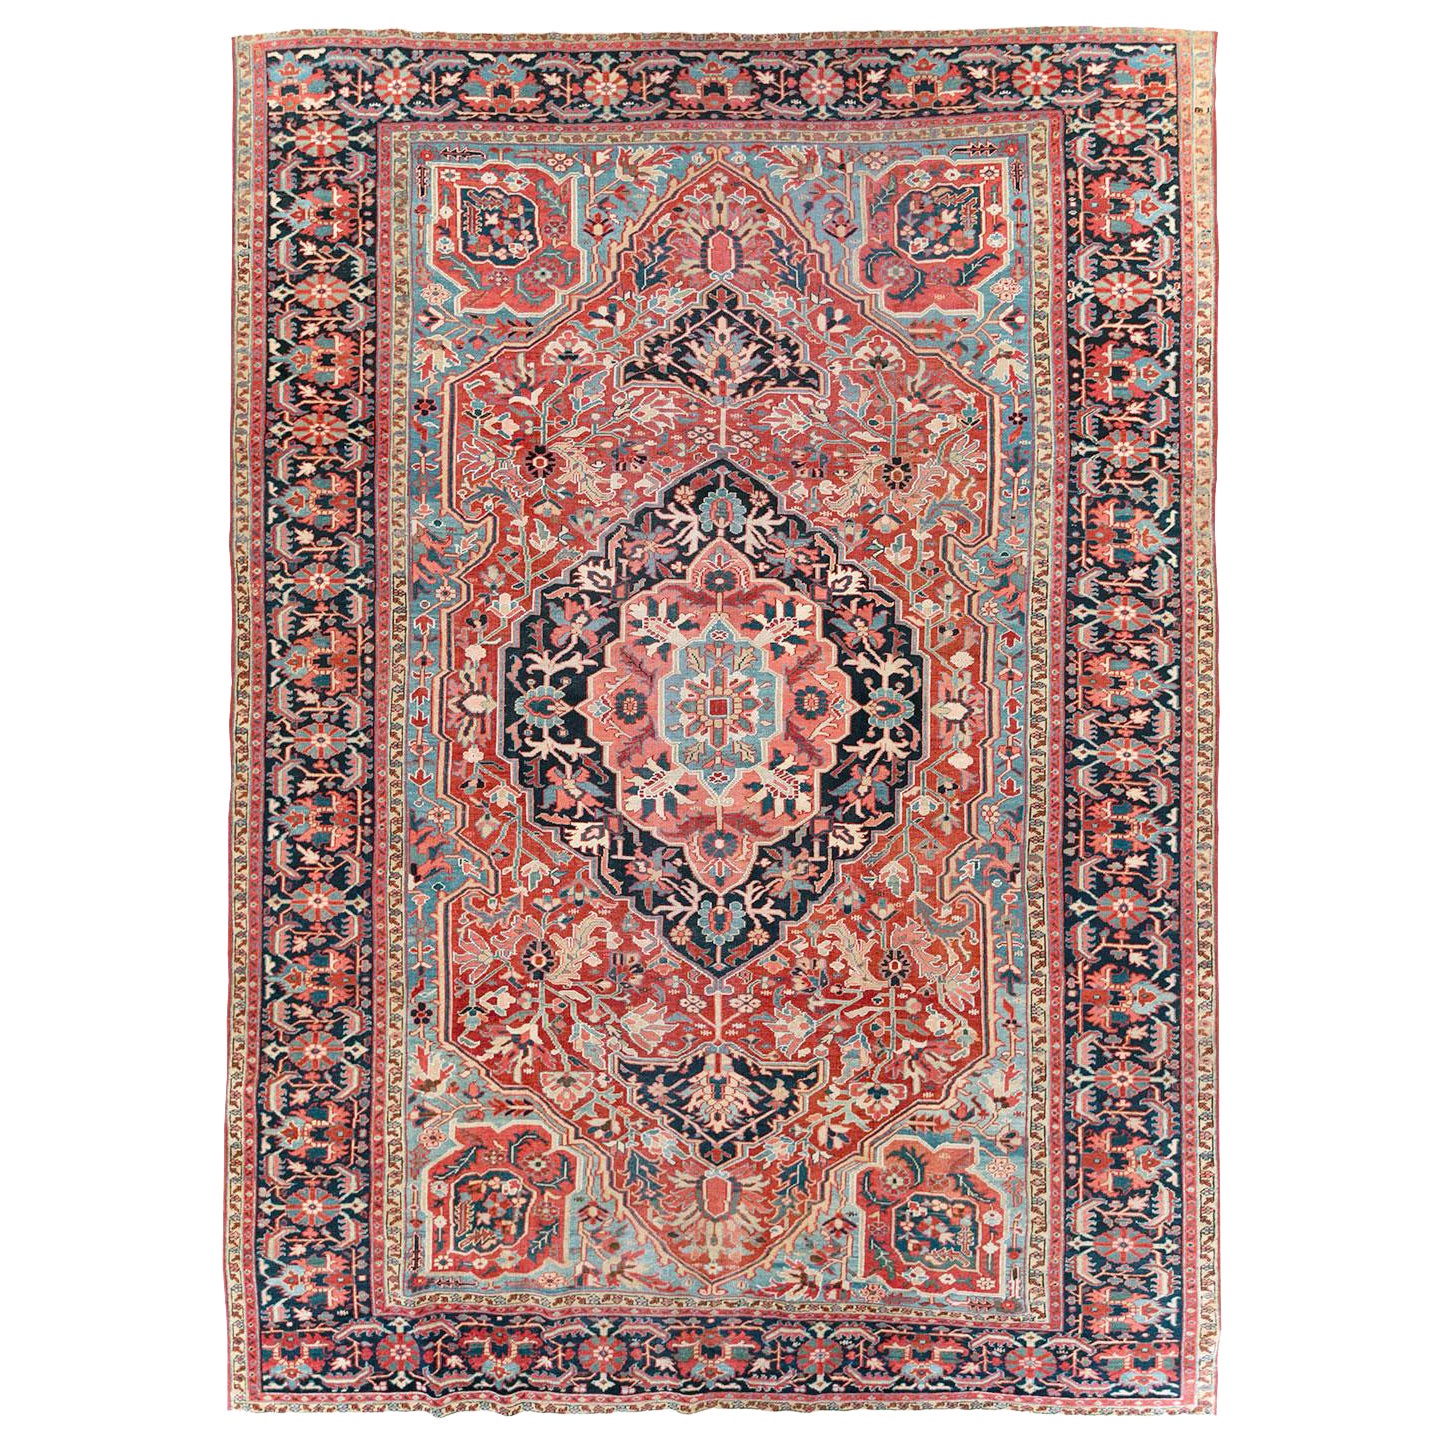 Early 20th Century Handmade Persian Heriz Large Room Size Carpet For Sale